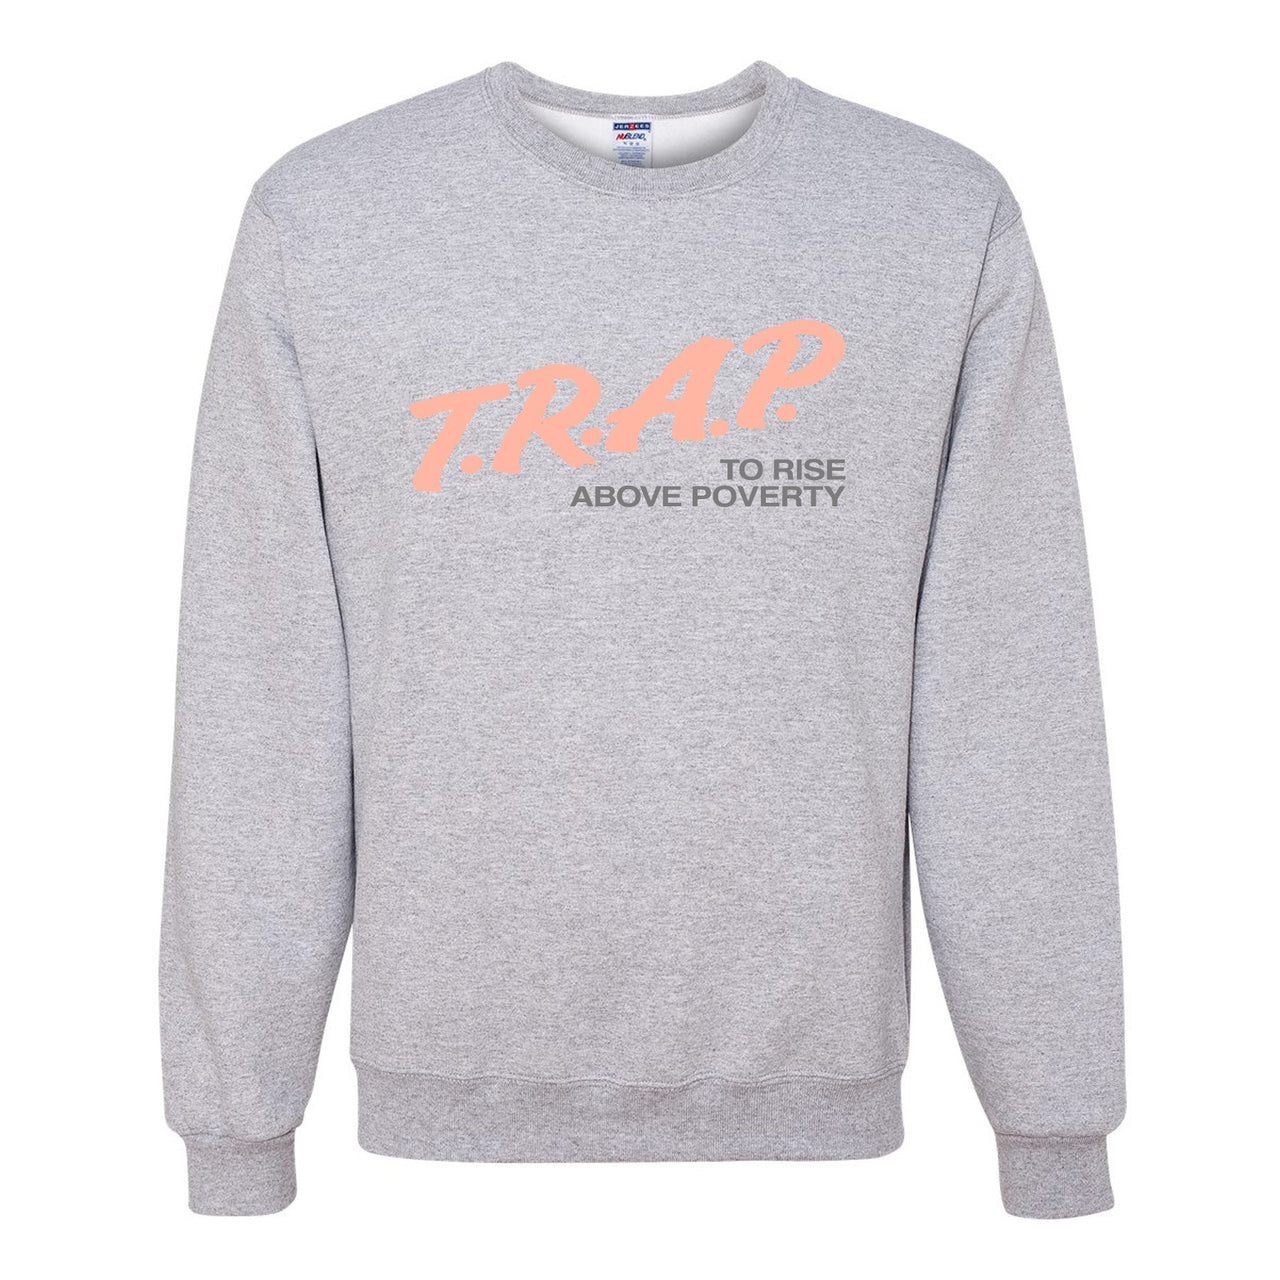 True Form v2 350s Crewneck Sweater | Trap To Rise Above Poverty, Heathered Light Gray